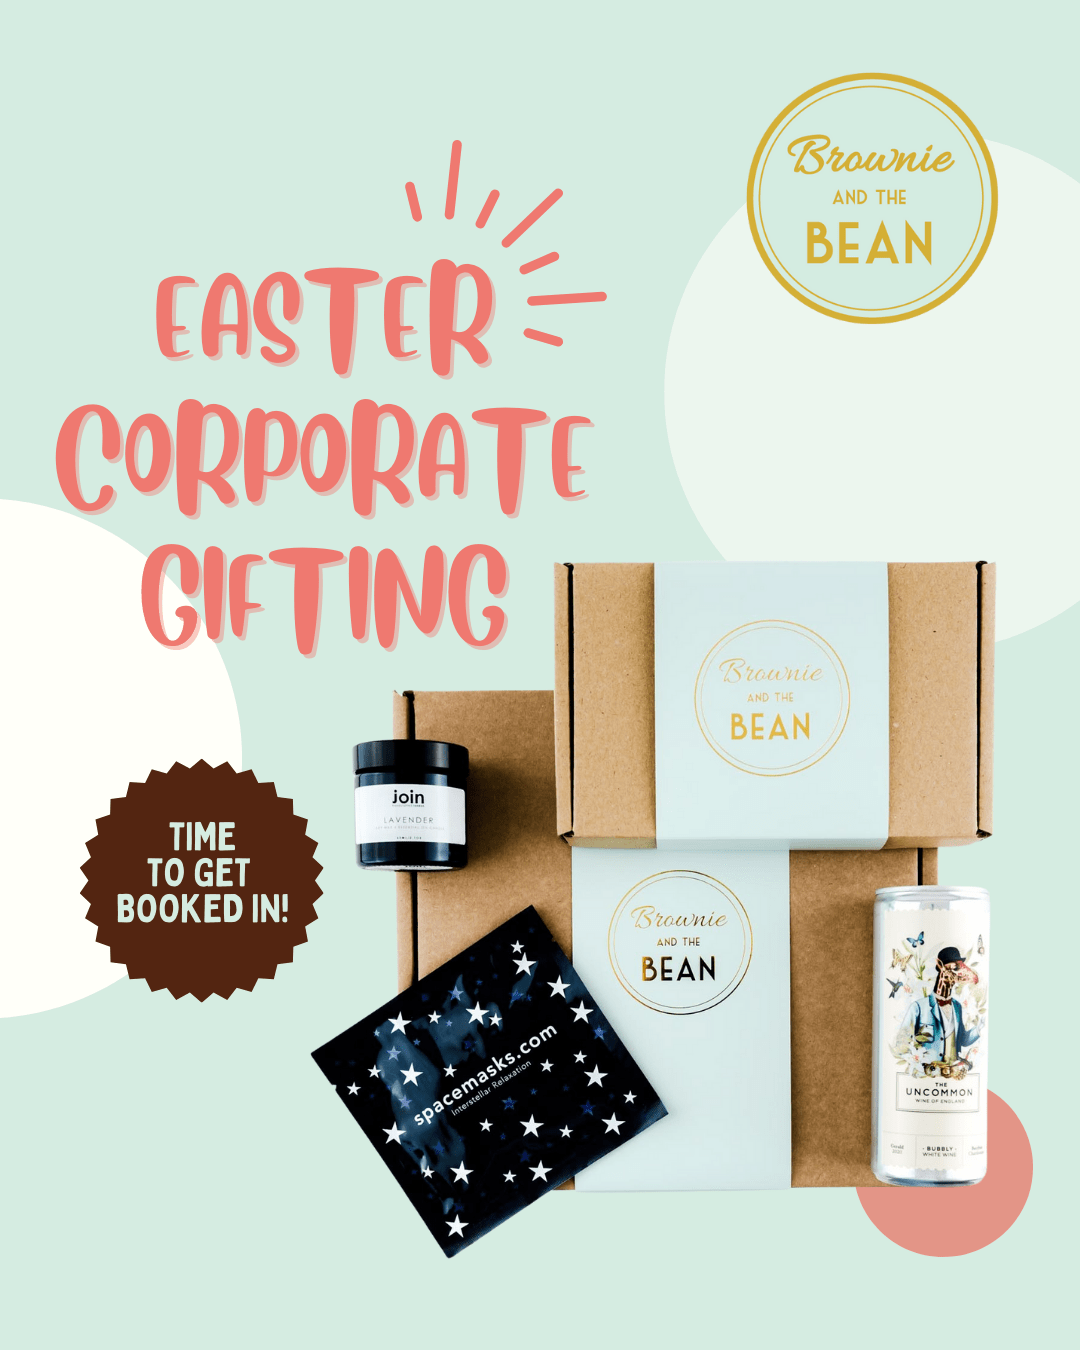 Easter Corporate Gifting ideas are on a pale mint green background. The words Easter Corporate Gifting are highlighted. There is 2 different sized Brownie and the Bean gift boxes in vision, plus a Spacemask, candle and a can of English Sparkling Wine.